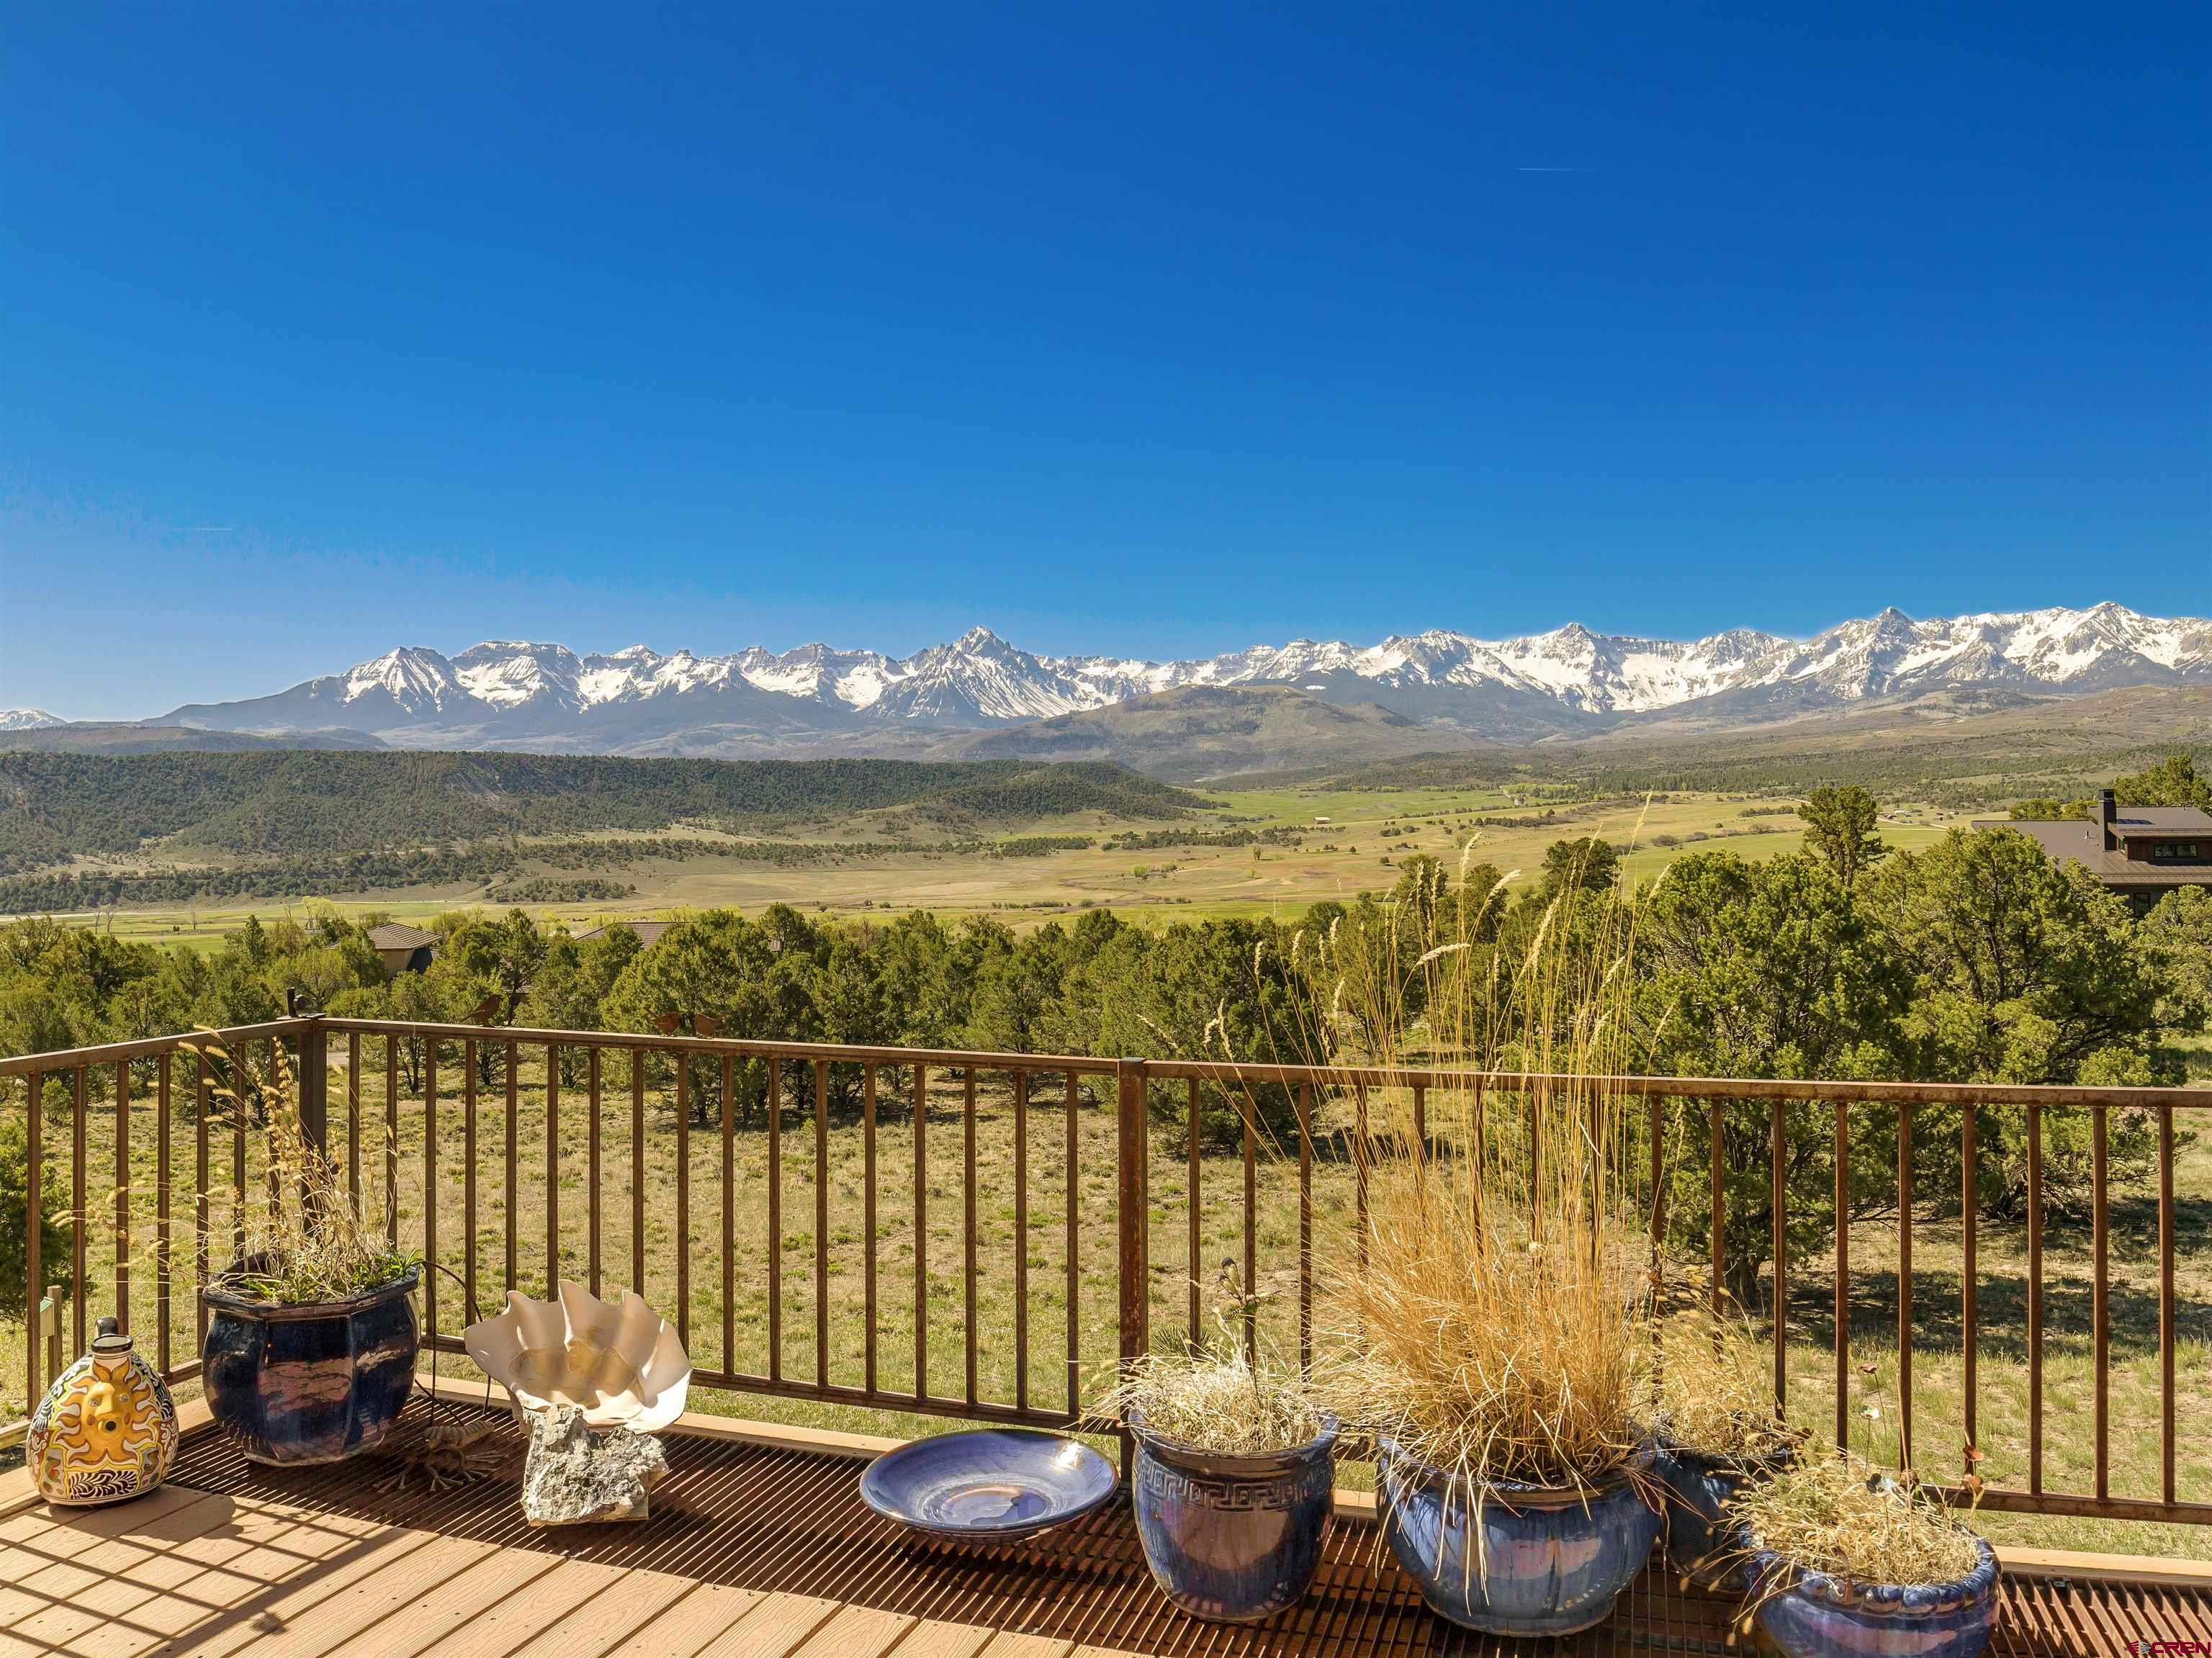 IT IS ALL ABOUT THE VIEW! Here is your dream property!  Don't miss the opportunity to own this well maintained Log Home on 3.1 acres with one of the BEST San Juan Mtn Views Ouray County has to offer!!  You will seriously fall in love with this awesome 180 degree view of the East Cimarron Range, South Sneffels Range and West to the Dallas Divide.  Quality through out with a cozy log cabin feel, 4 bedrooms, 3.5 baths, wood burning stone fireplace and a pellet stove, large low maintenance decks, hot tub included, 520sq' caretakers unit on the lower level, large game room (pool table included), lots of storage, attached two car garage.  Snow-melt system for front entry walk, parking slab, roof and gutters. Metal roof and high-efficiency boiler installed 2019.  Detached garage built in 2010 with 8800 watt solar system installed on the roof.  Garage is 523.8 sq' (33'x16')  Green house built/attached to the SW end of the detached garage.  Must see to appreciate!  Spectacular San Juan Mountain View!!!